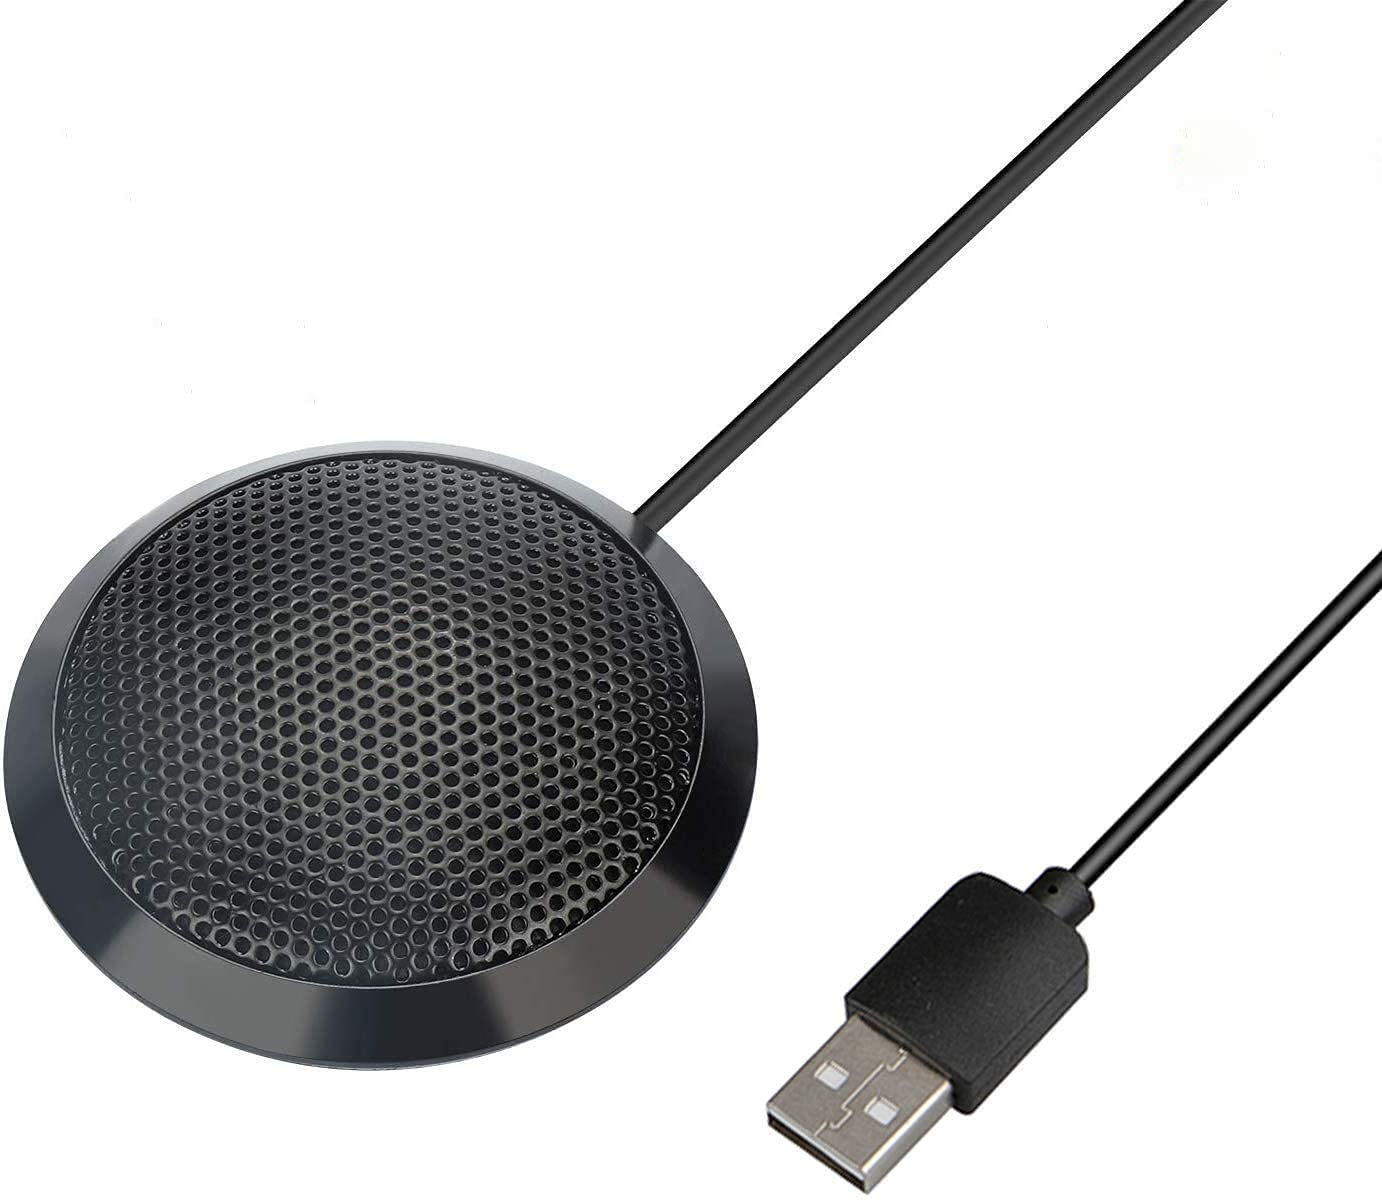 GOBEST USB Microphone for Meeting Business Computer PC, Laptop,Desktop,Mac & Macbook, Portable Table for for Online Chatting, VoIP Calls, Online Meeting, Video Conference(Black)